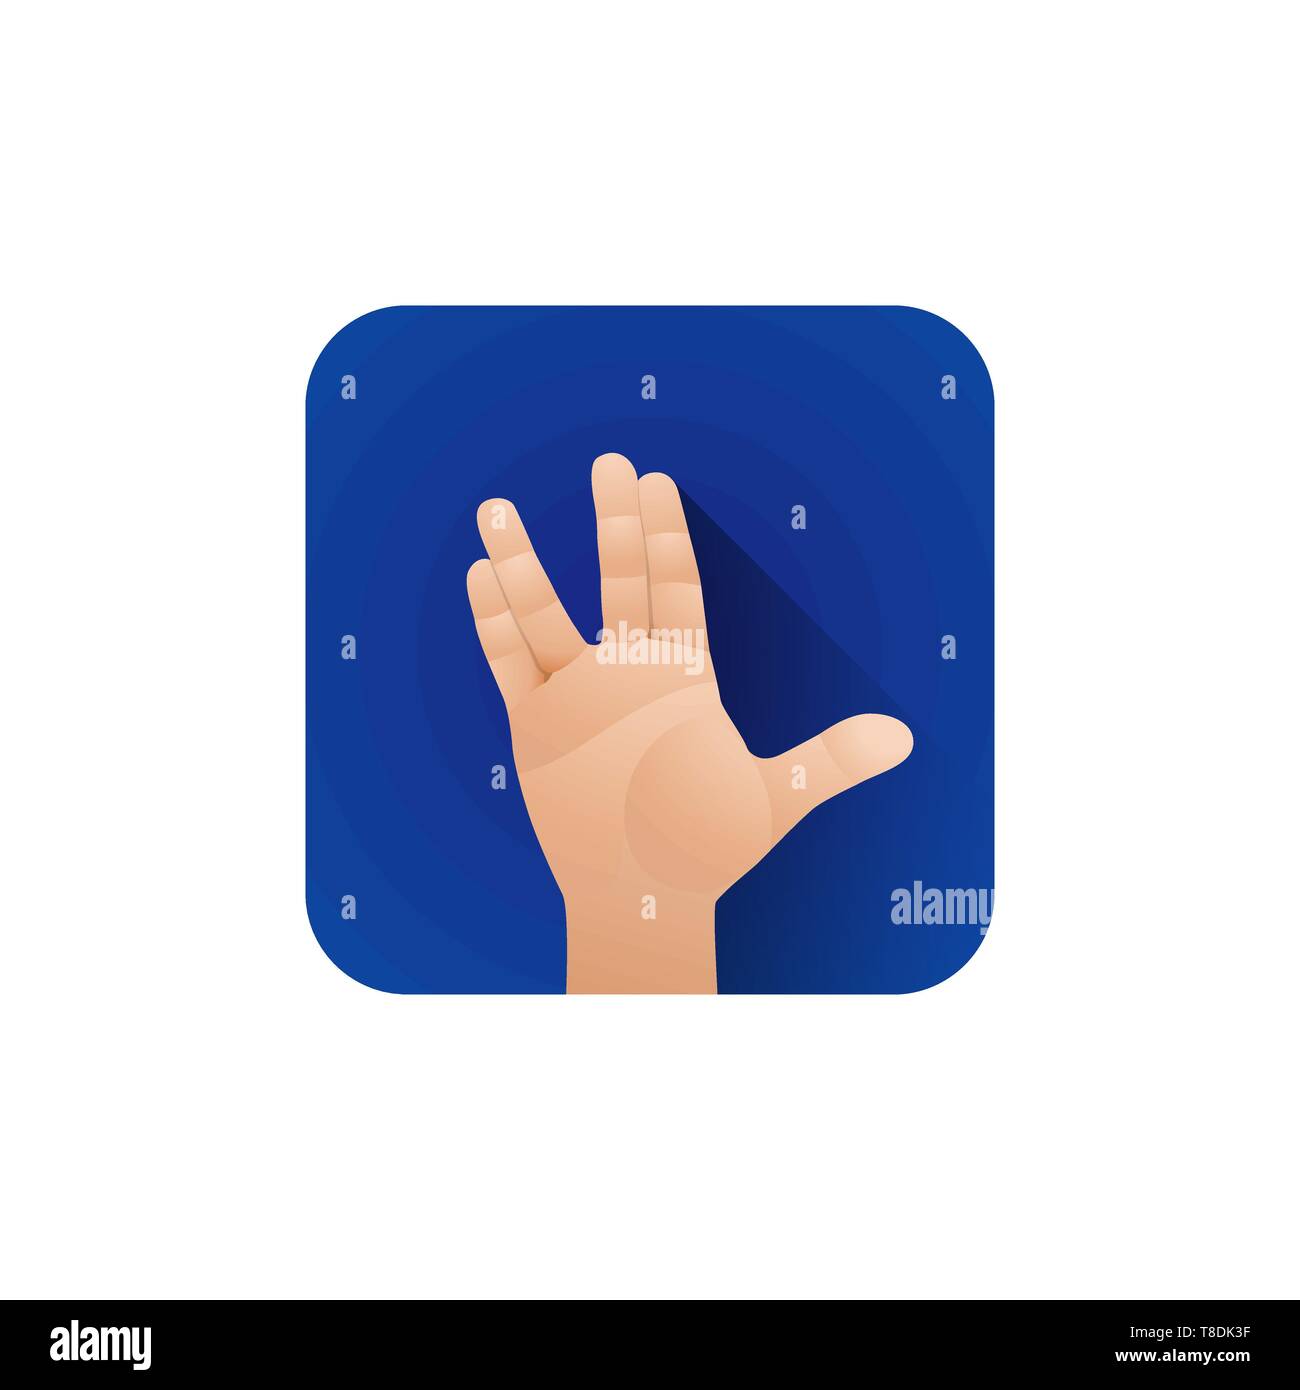 vector symbolic spread fingers male palm hand welcome hello spok gesture concept sign illustration light icon poster design isolated on blue backgroun Stock Vector